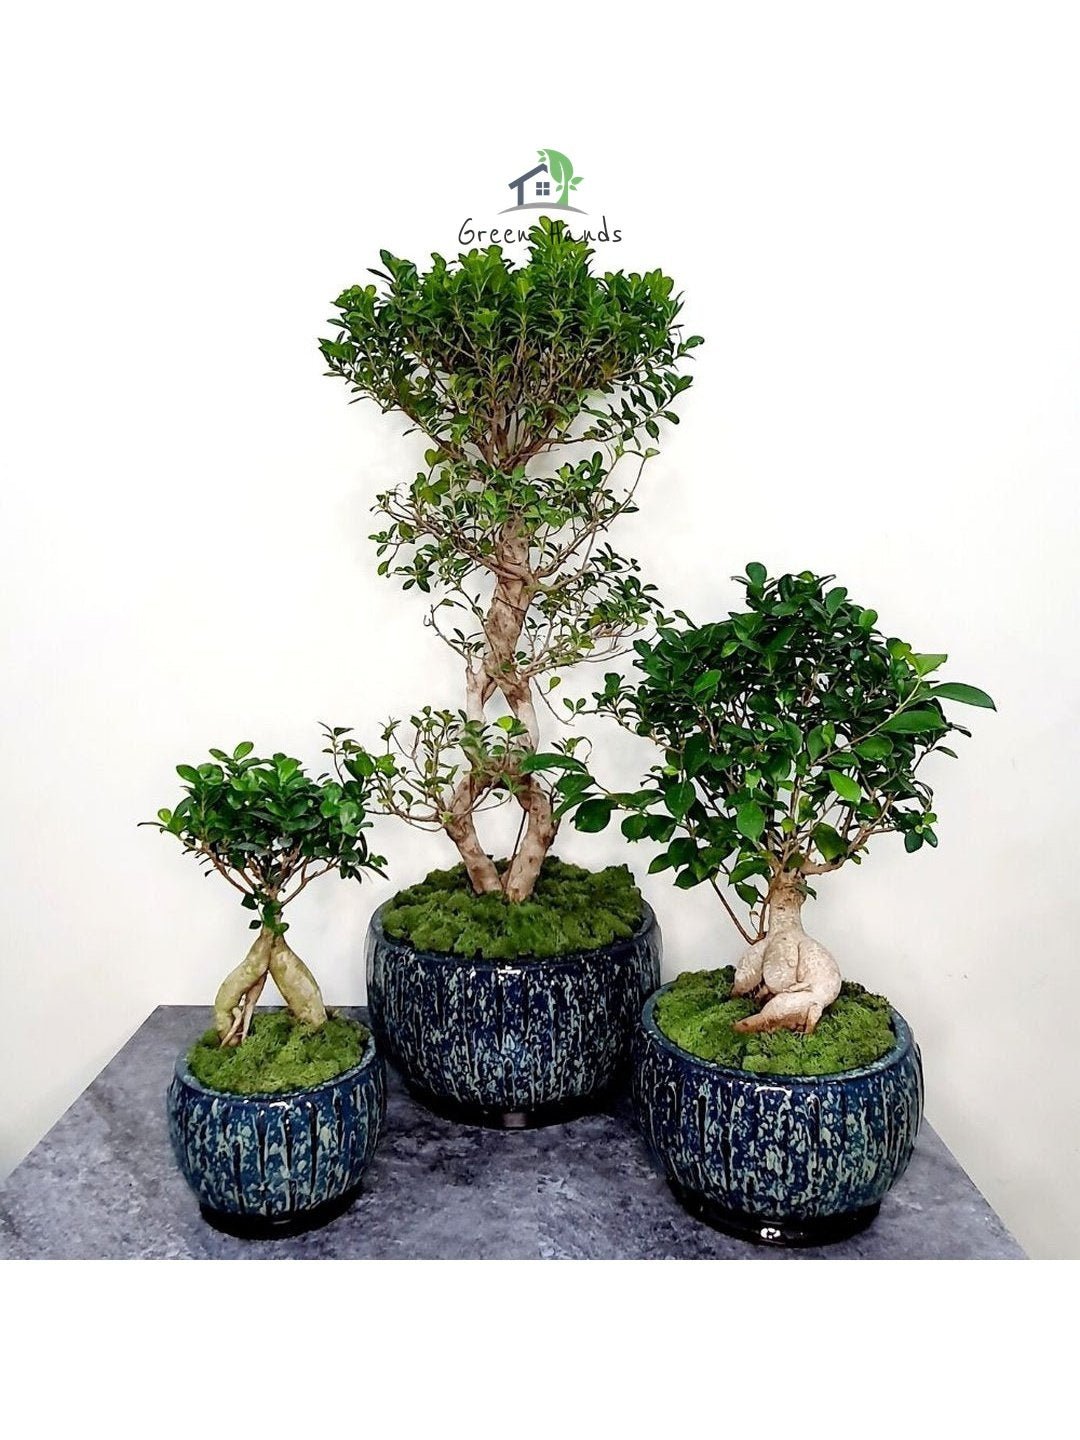 XL 8 Shaped Bonsai Tree Planted in Fiber Grey Pot with Moss Topping